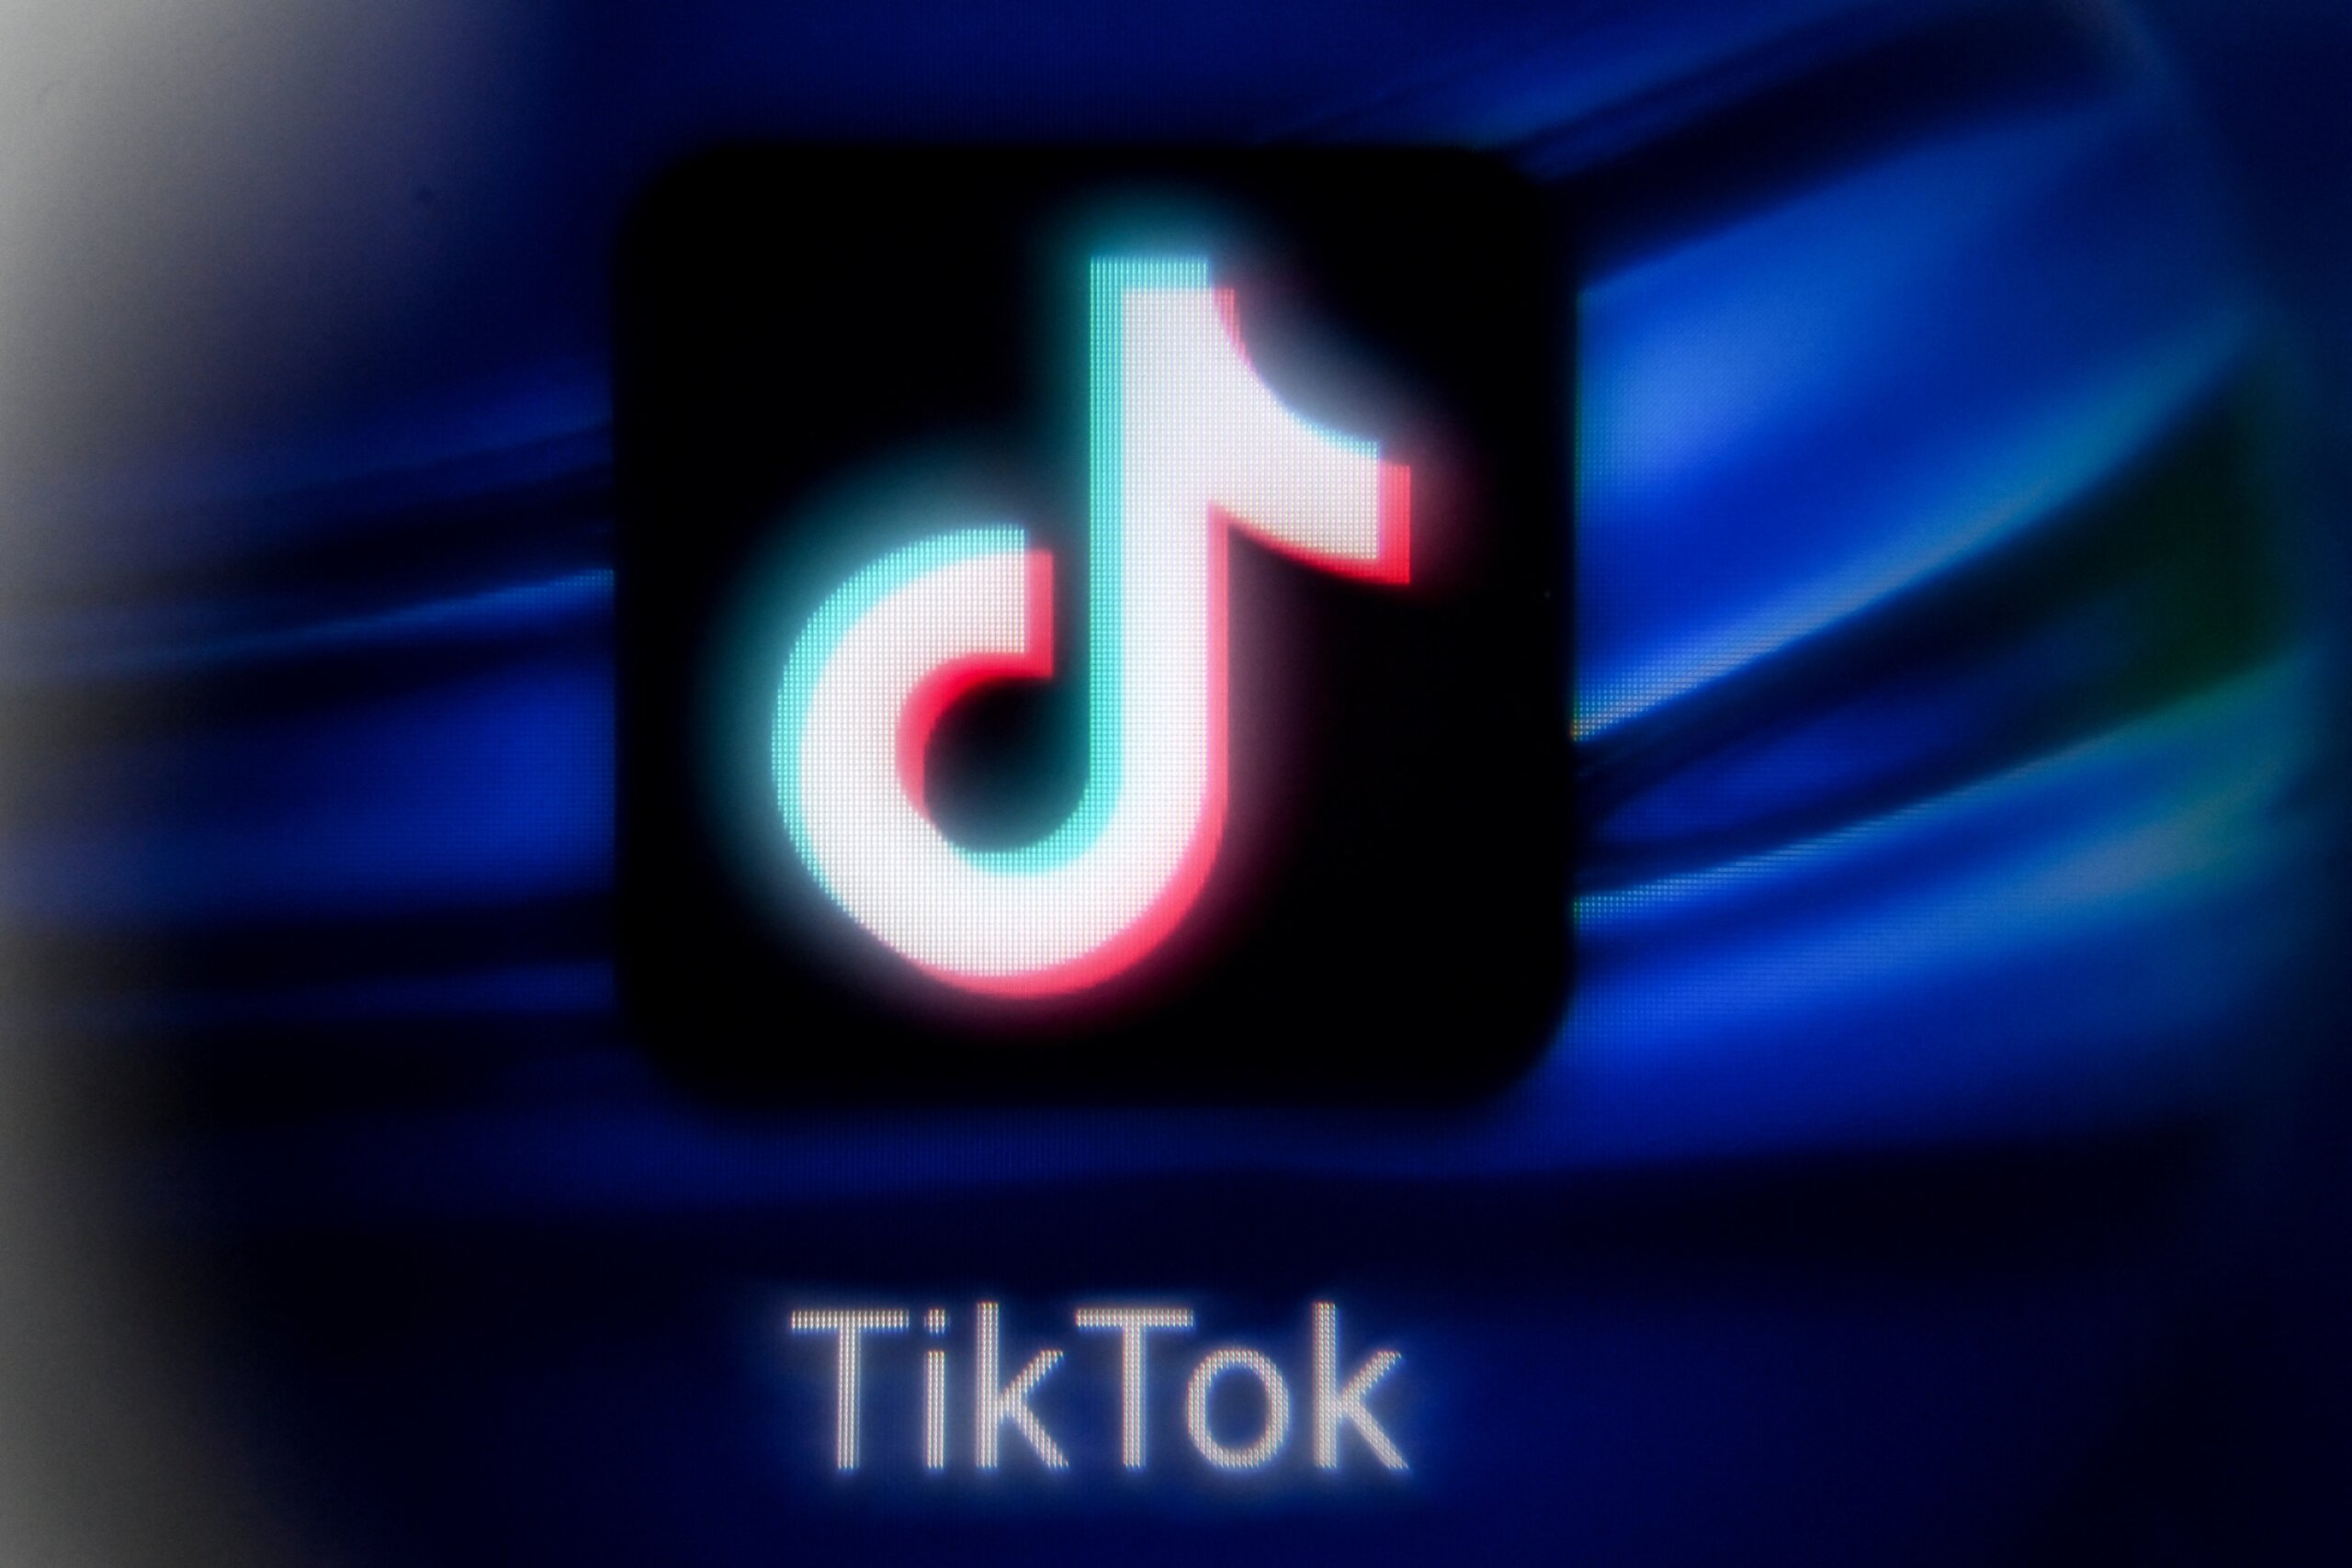 TikTok is now the most popular domain, overthrowing Google